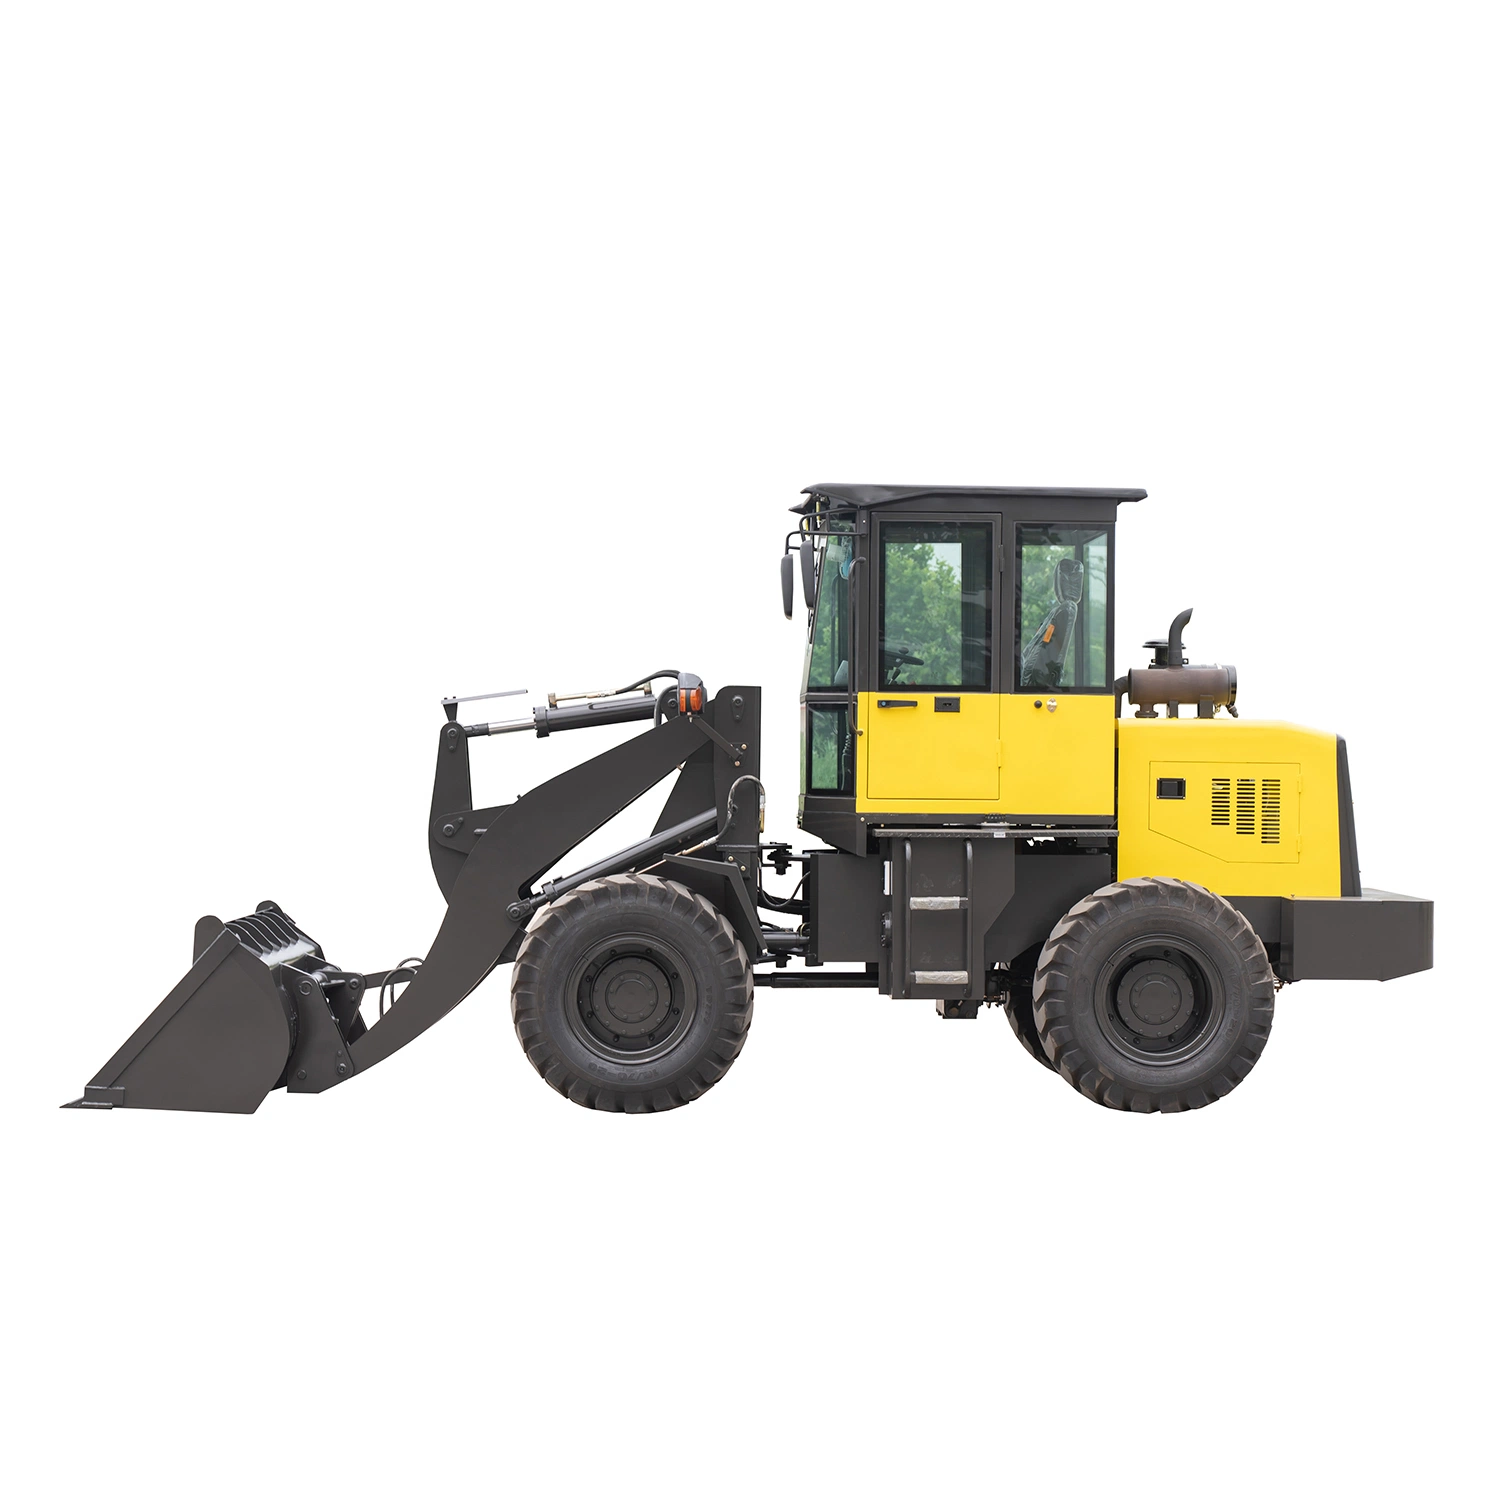 Chinese Construction Machines: World-Class Wheel Loaders